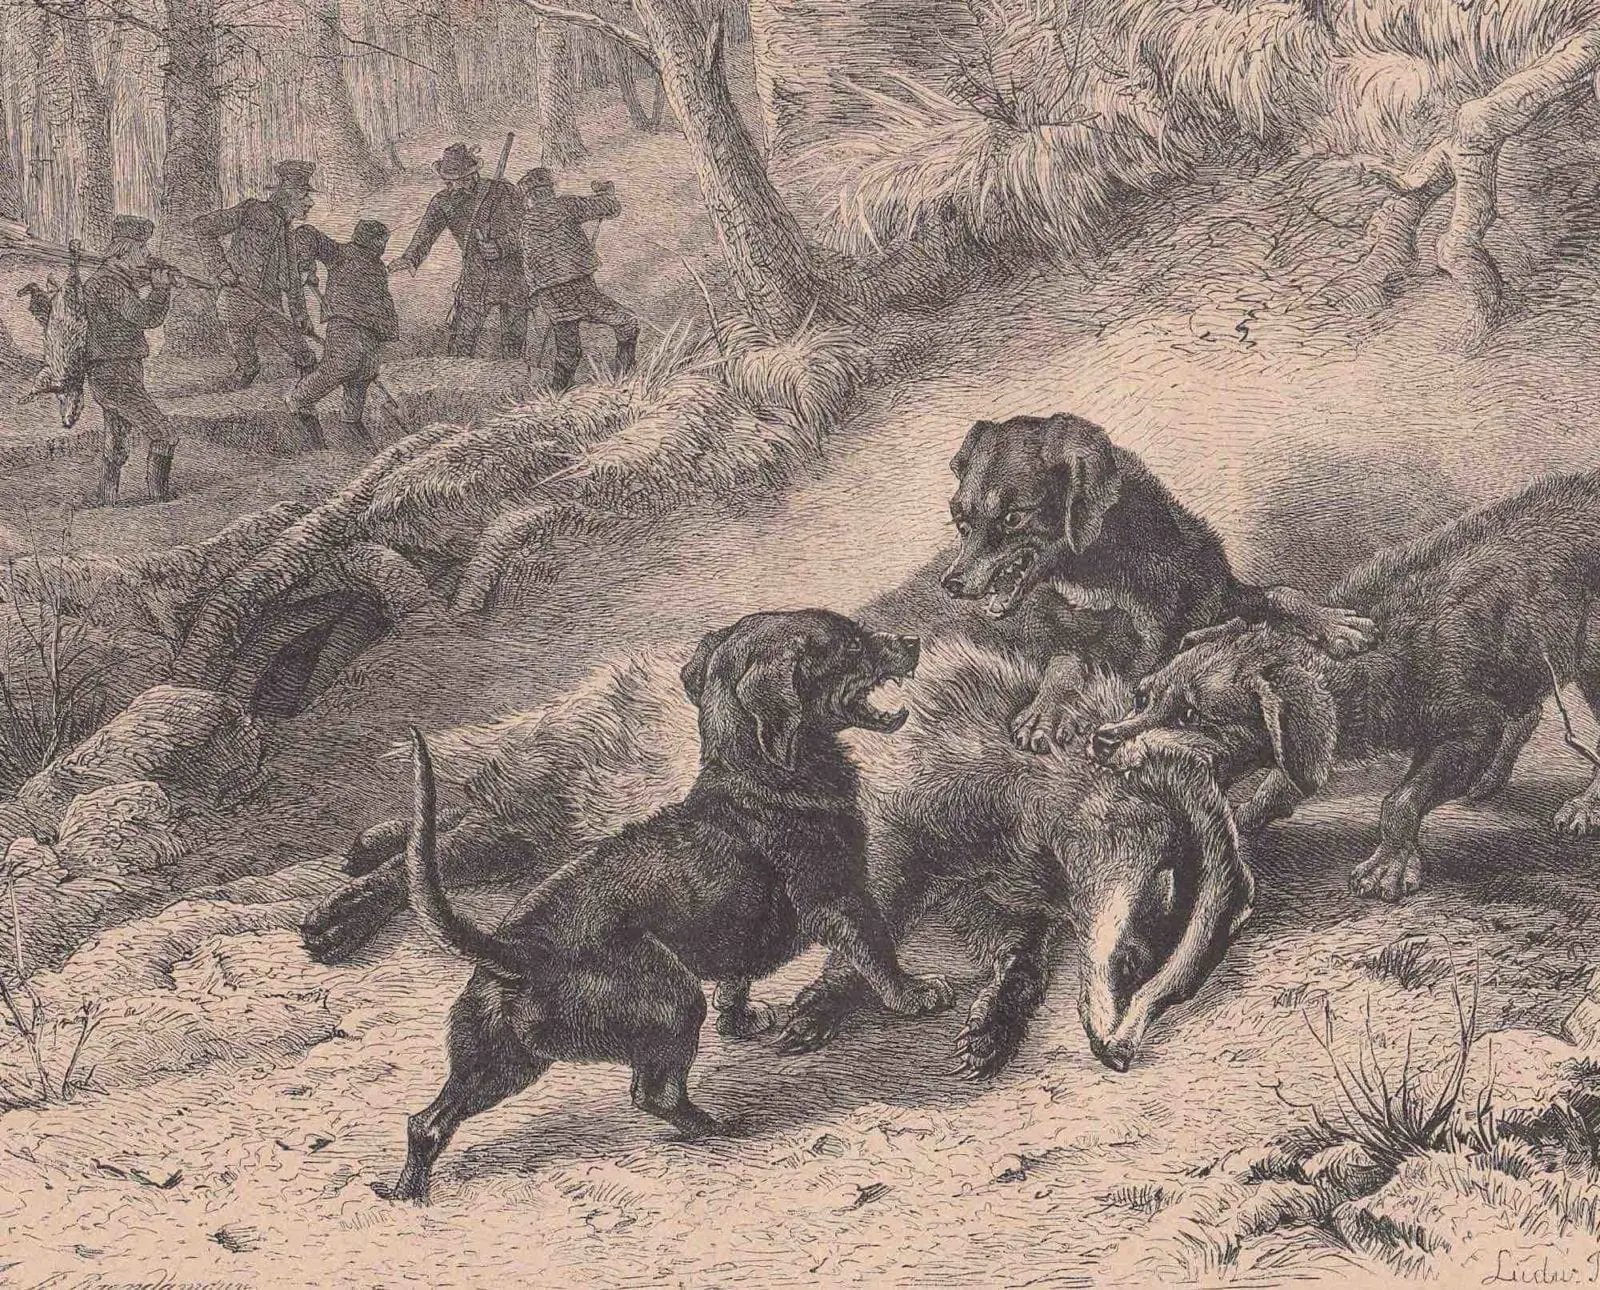 A historic image of teckels hunting game